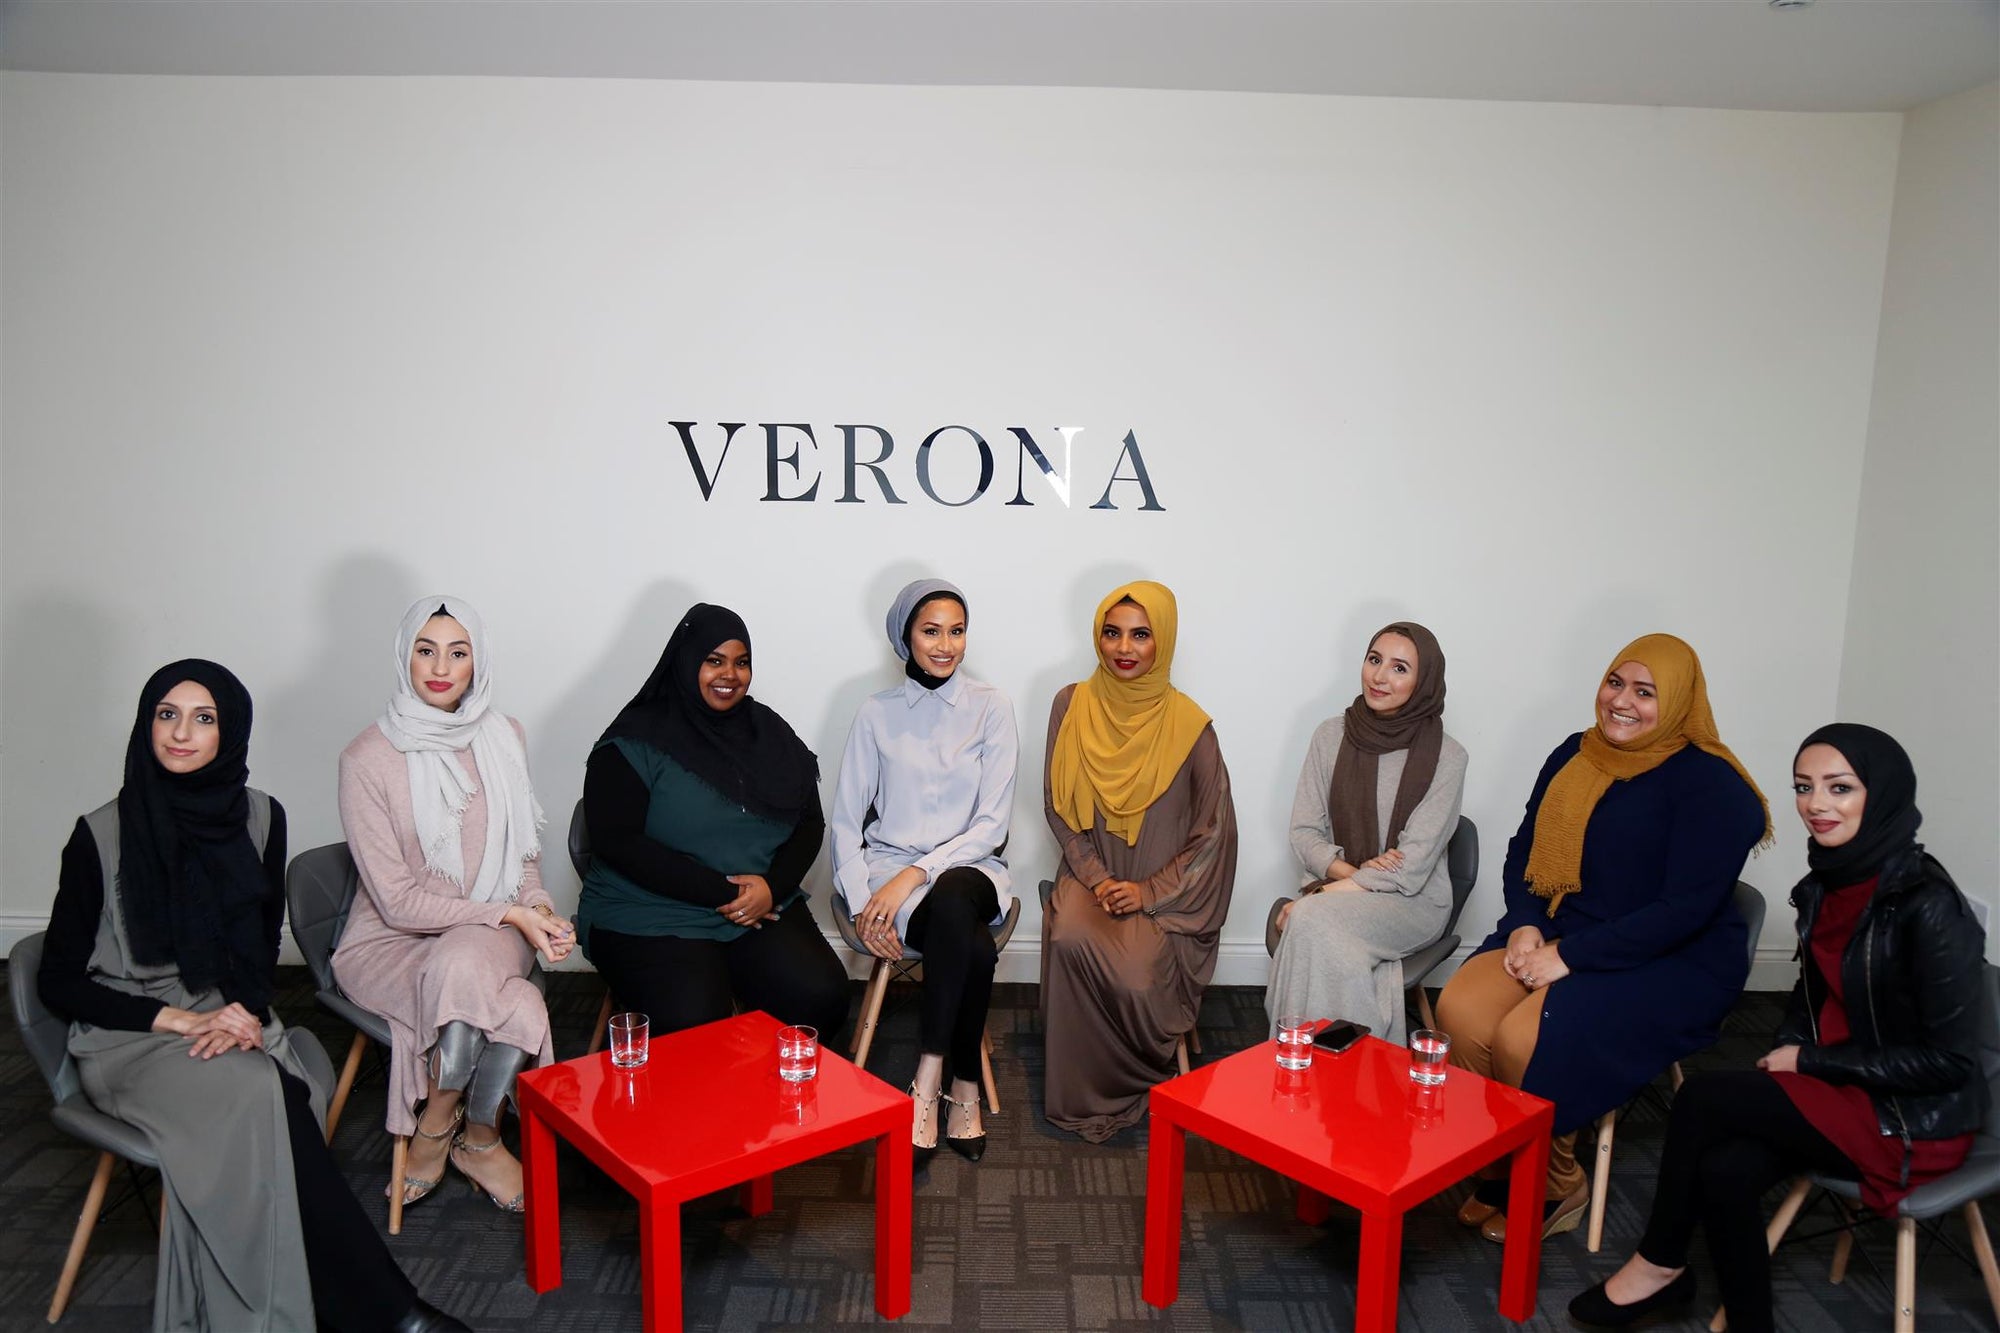 'More than Modest' presented by Verona Collection & The Muslim News